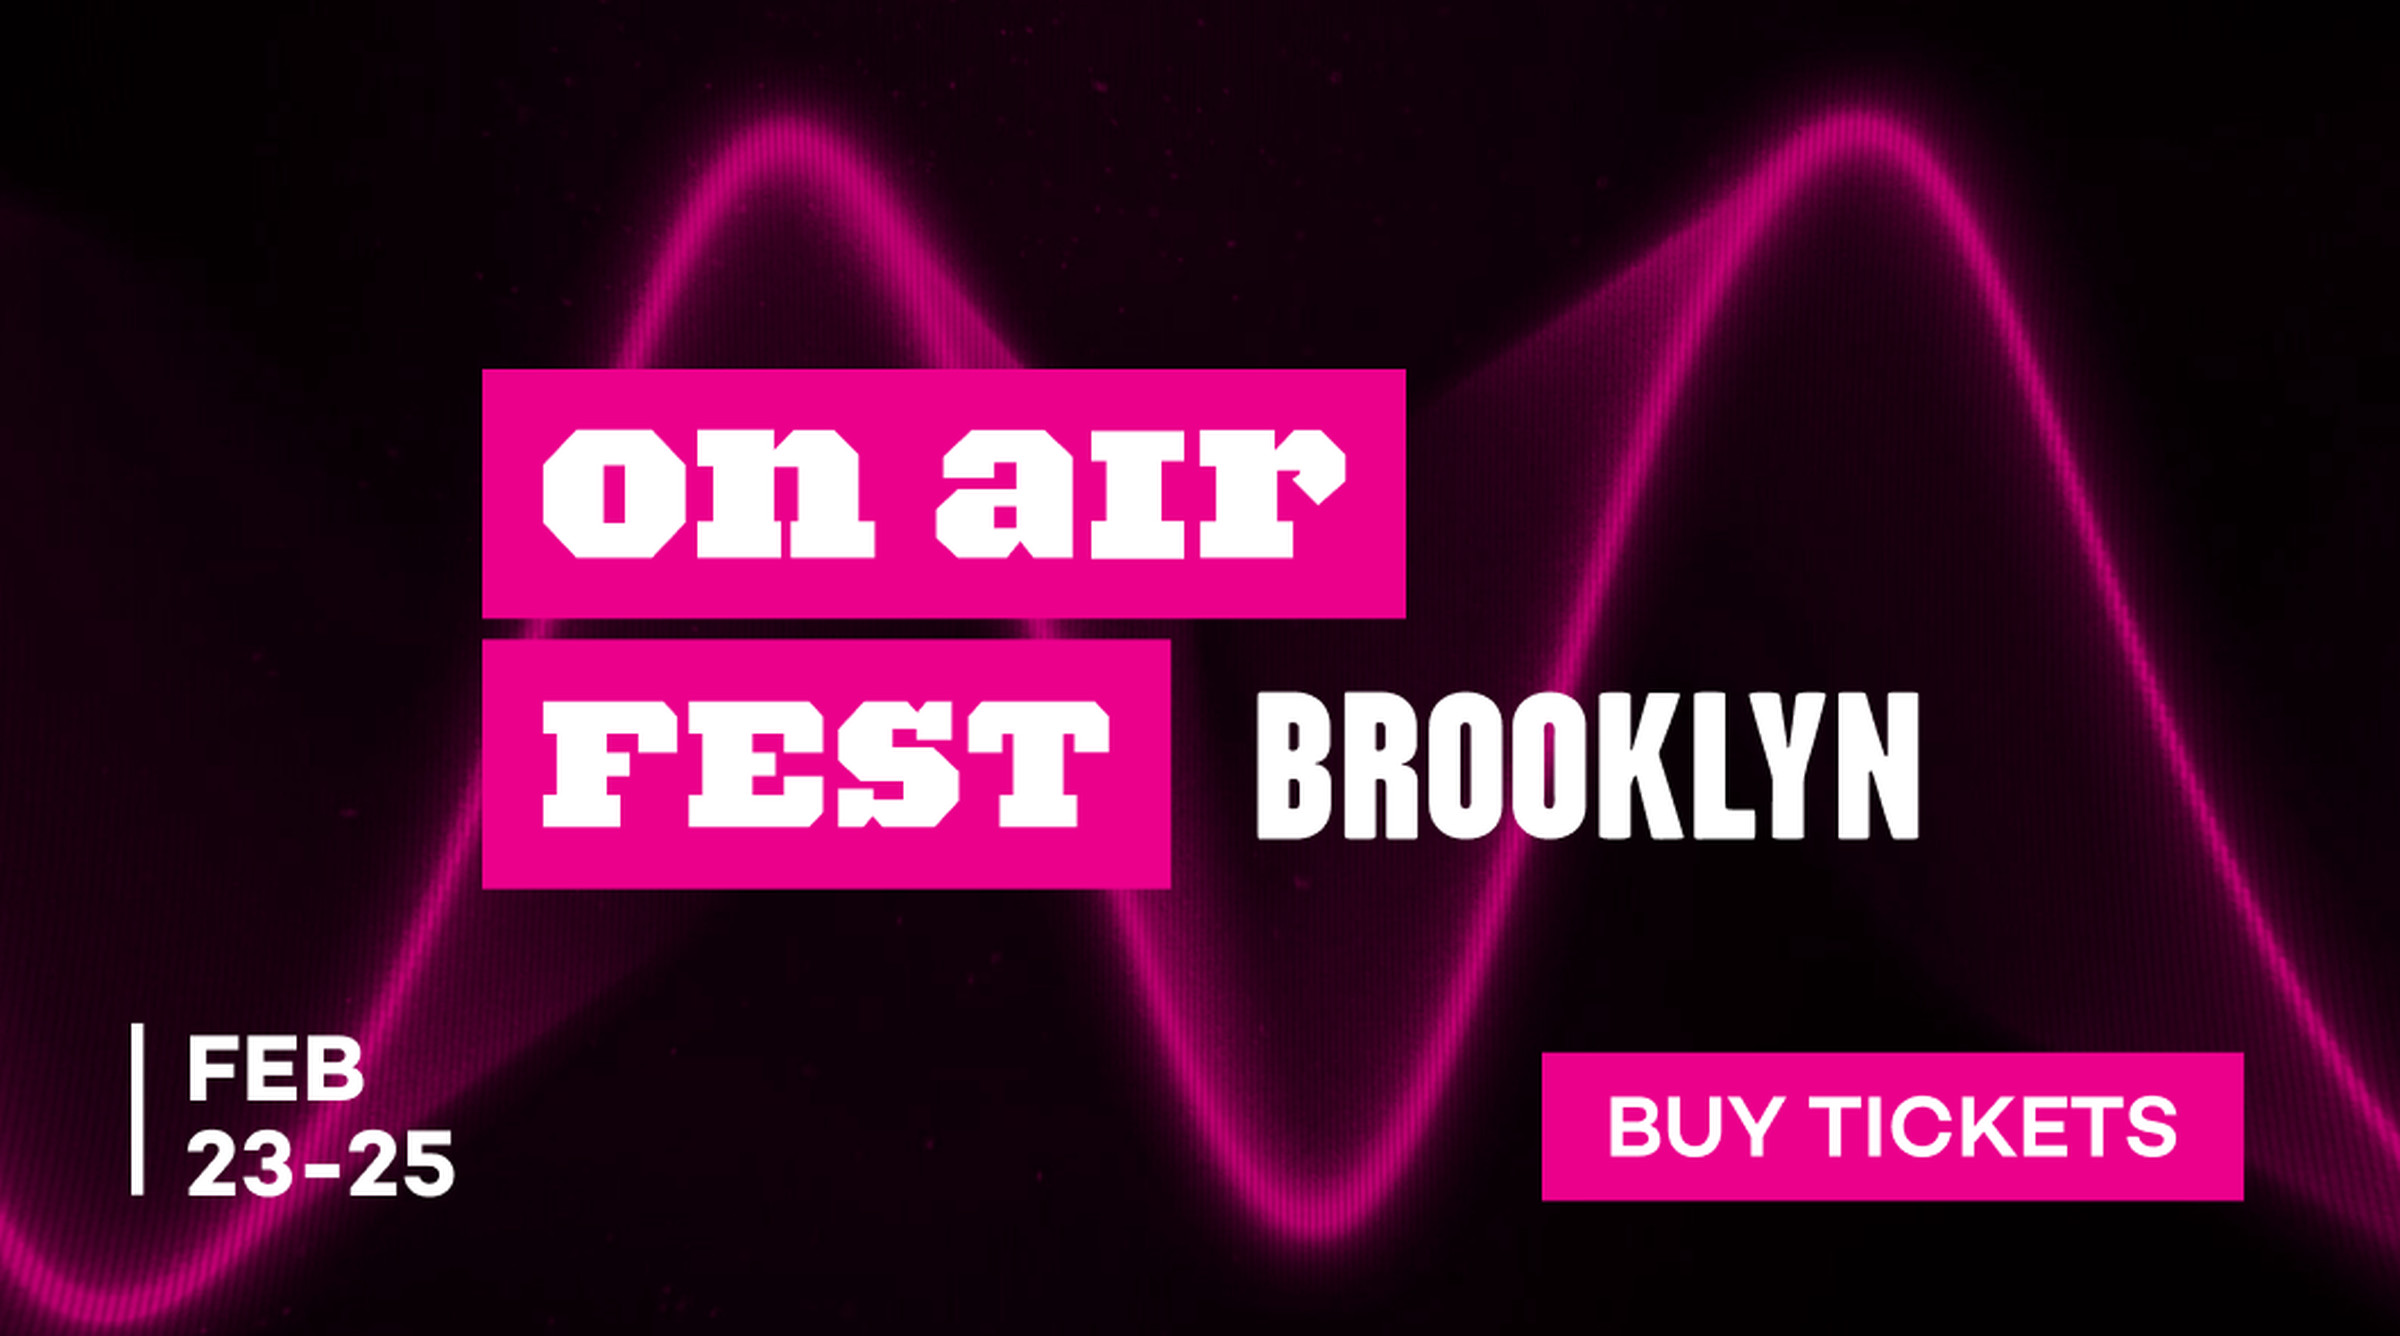 On Air Fest Brooklyn artwork with a link to buy tickets.